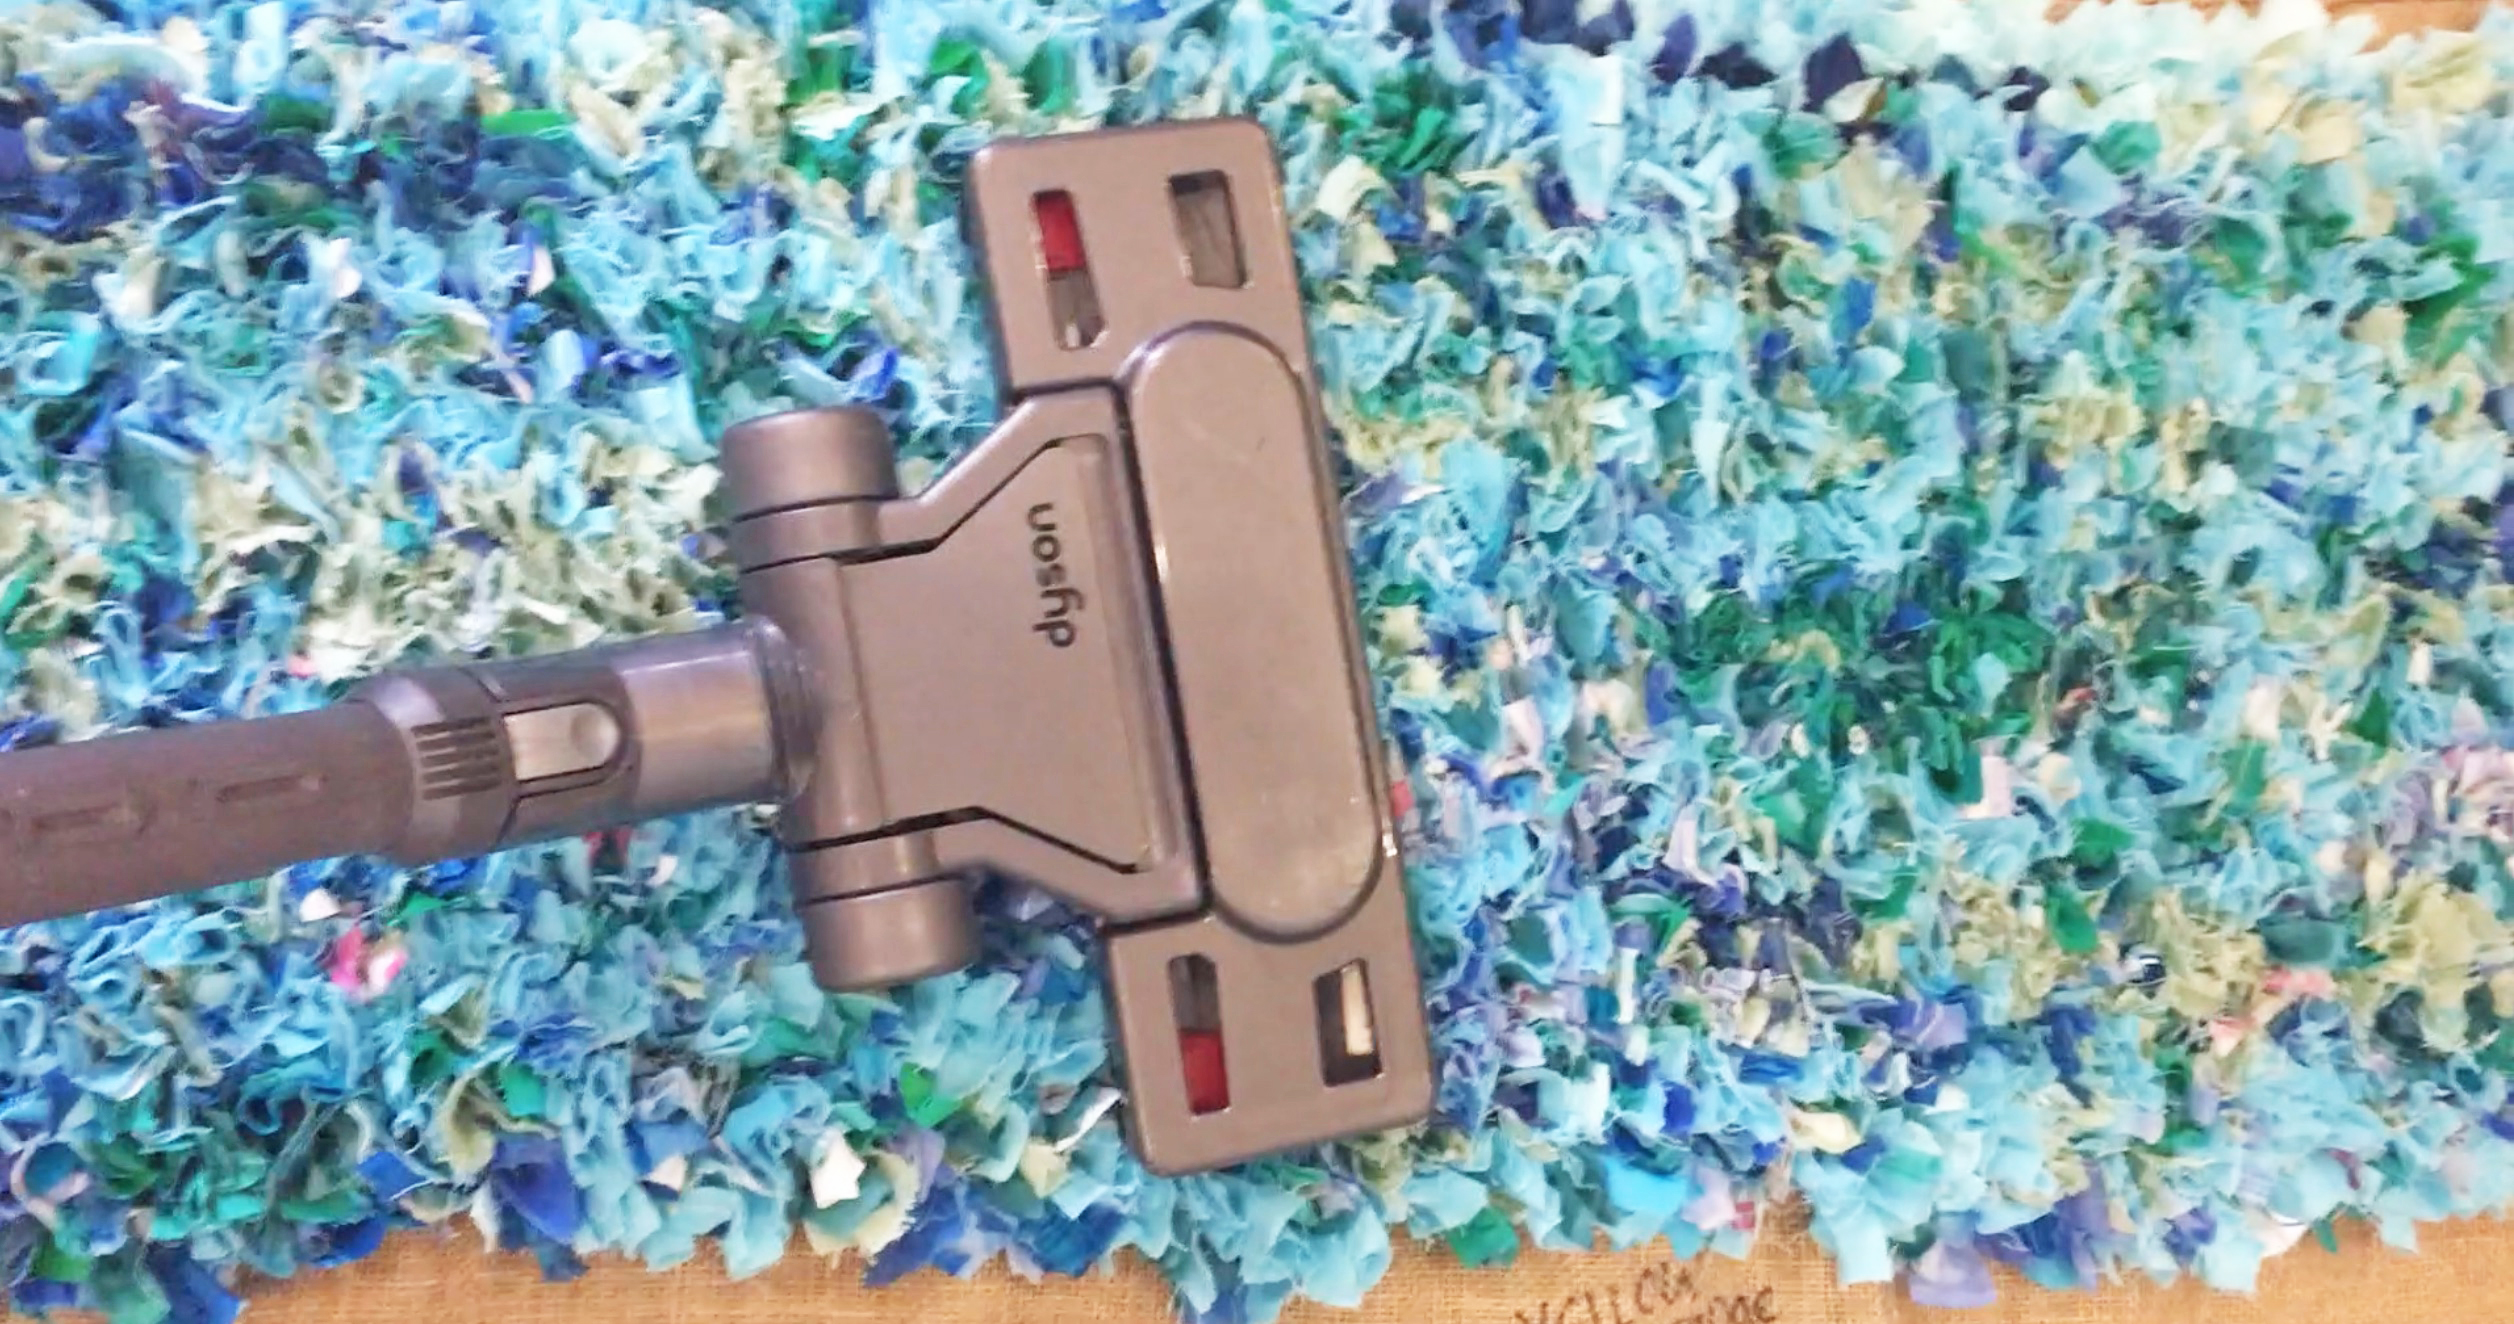 How to clean a rag rug - Vacuuming a blue Rag Rug with a Dyson vacuum